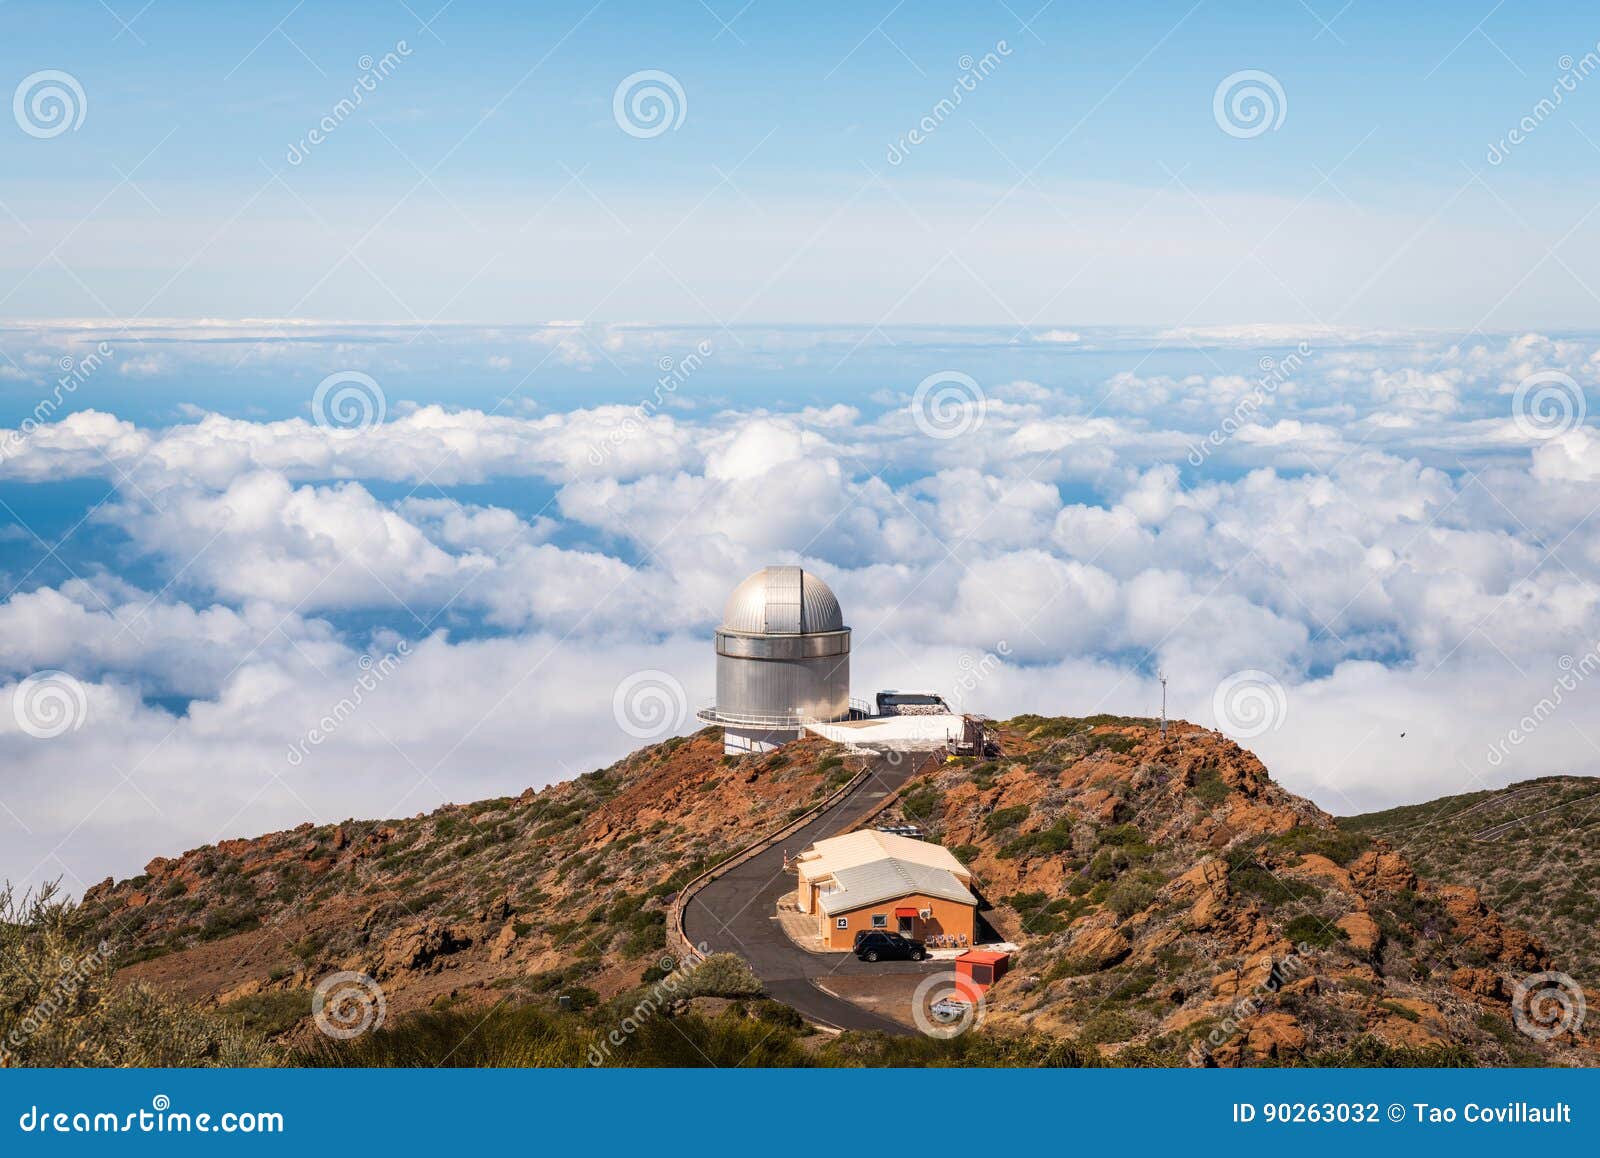 observatory over the clouds